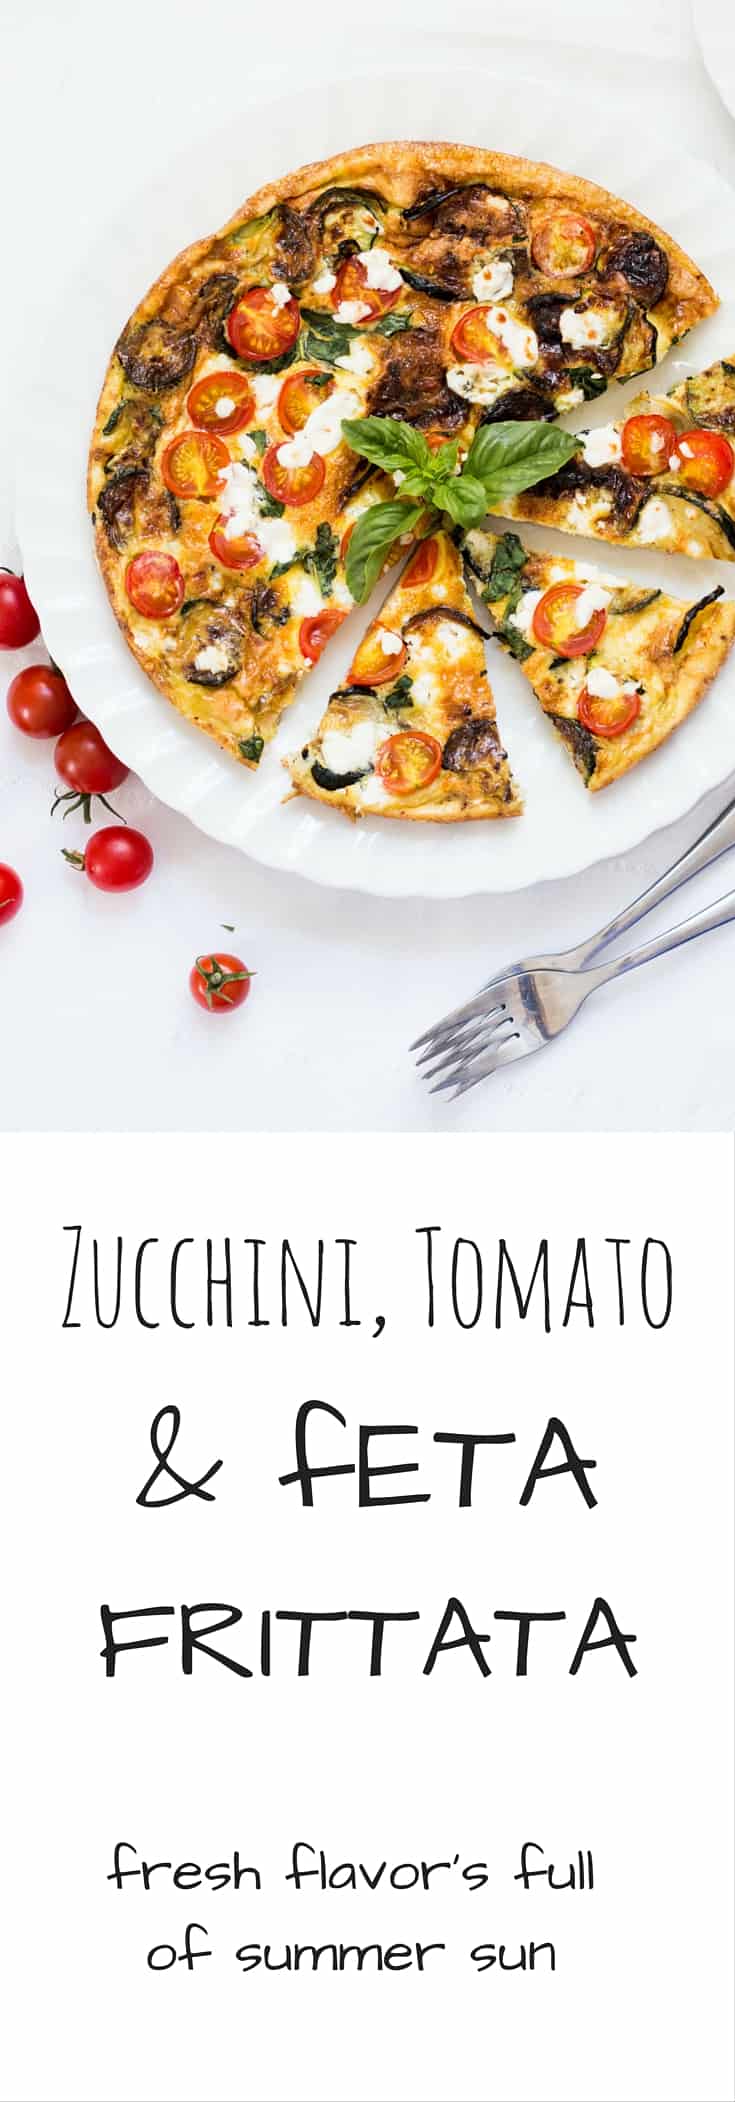 Zucchini Tomato and Feta Frittata. The perfect quick and easy dish to put together on a hot summer's day. Light and bursting with the flavor of summer produce